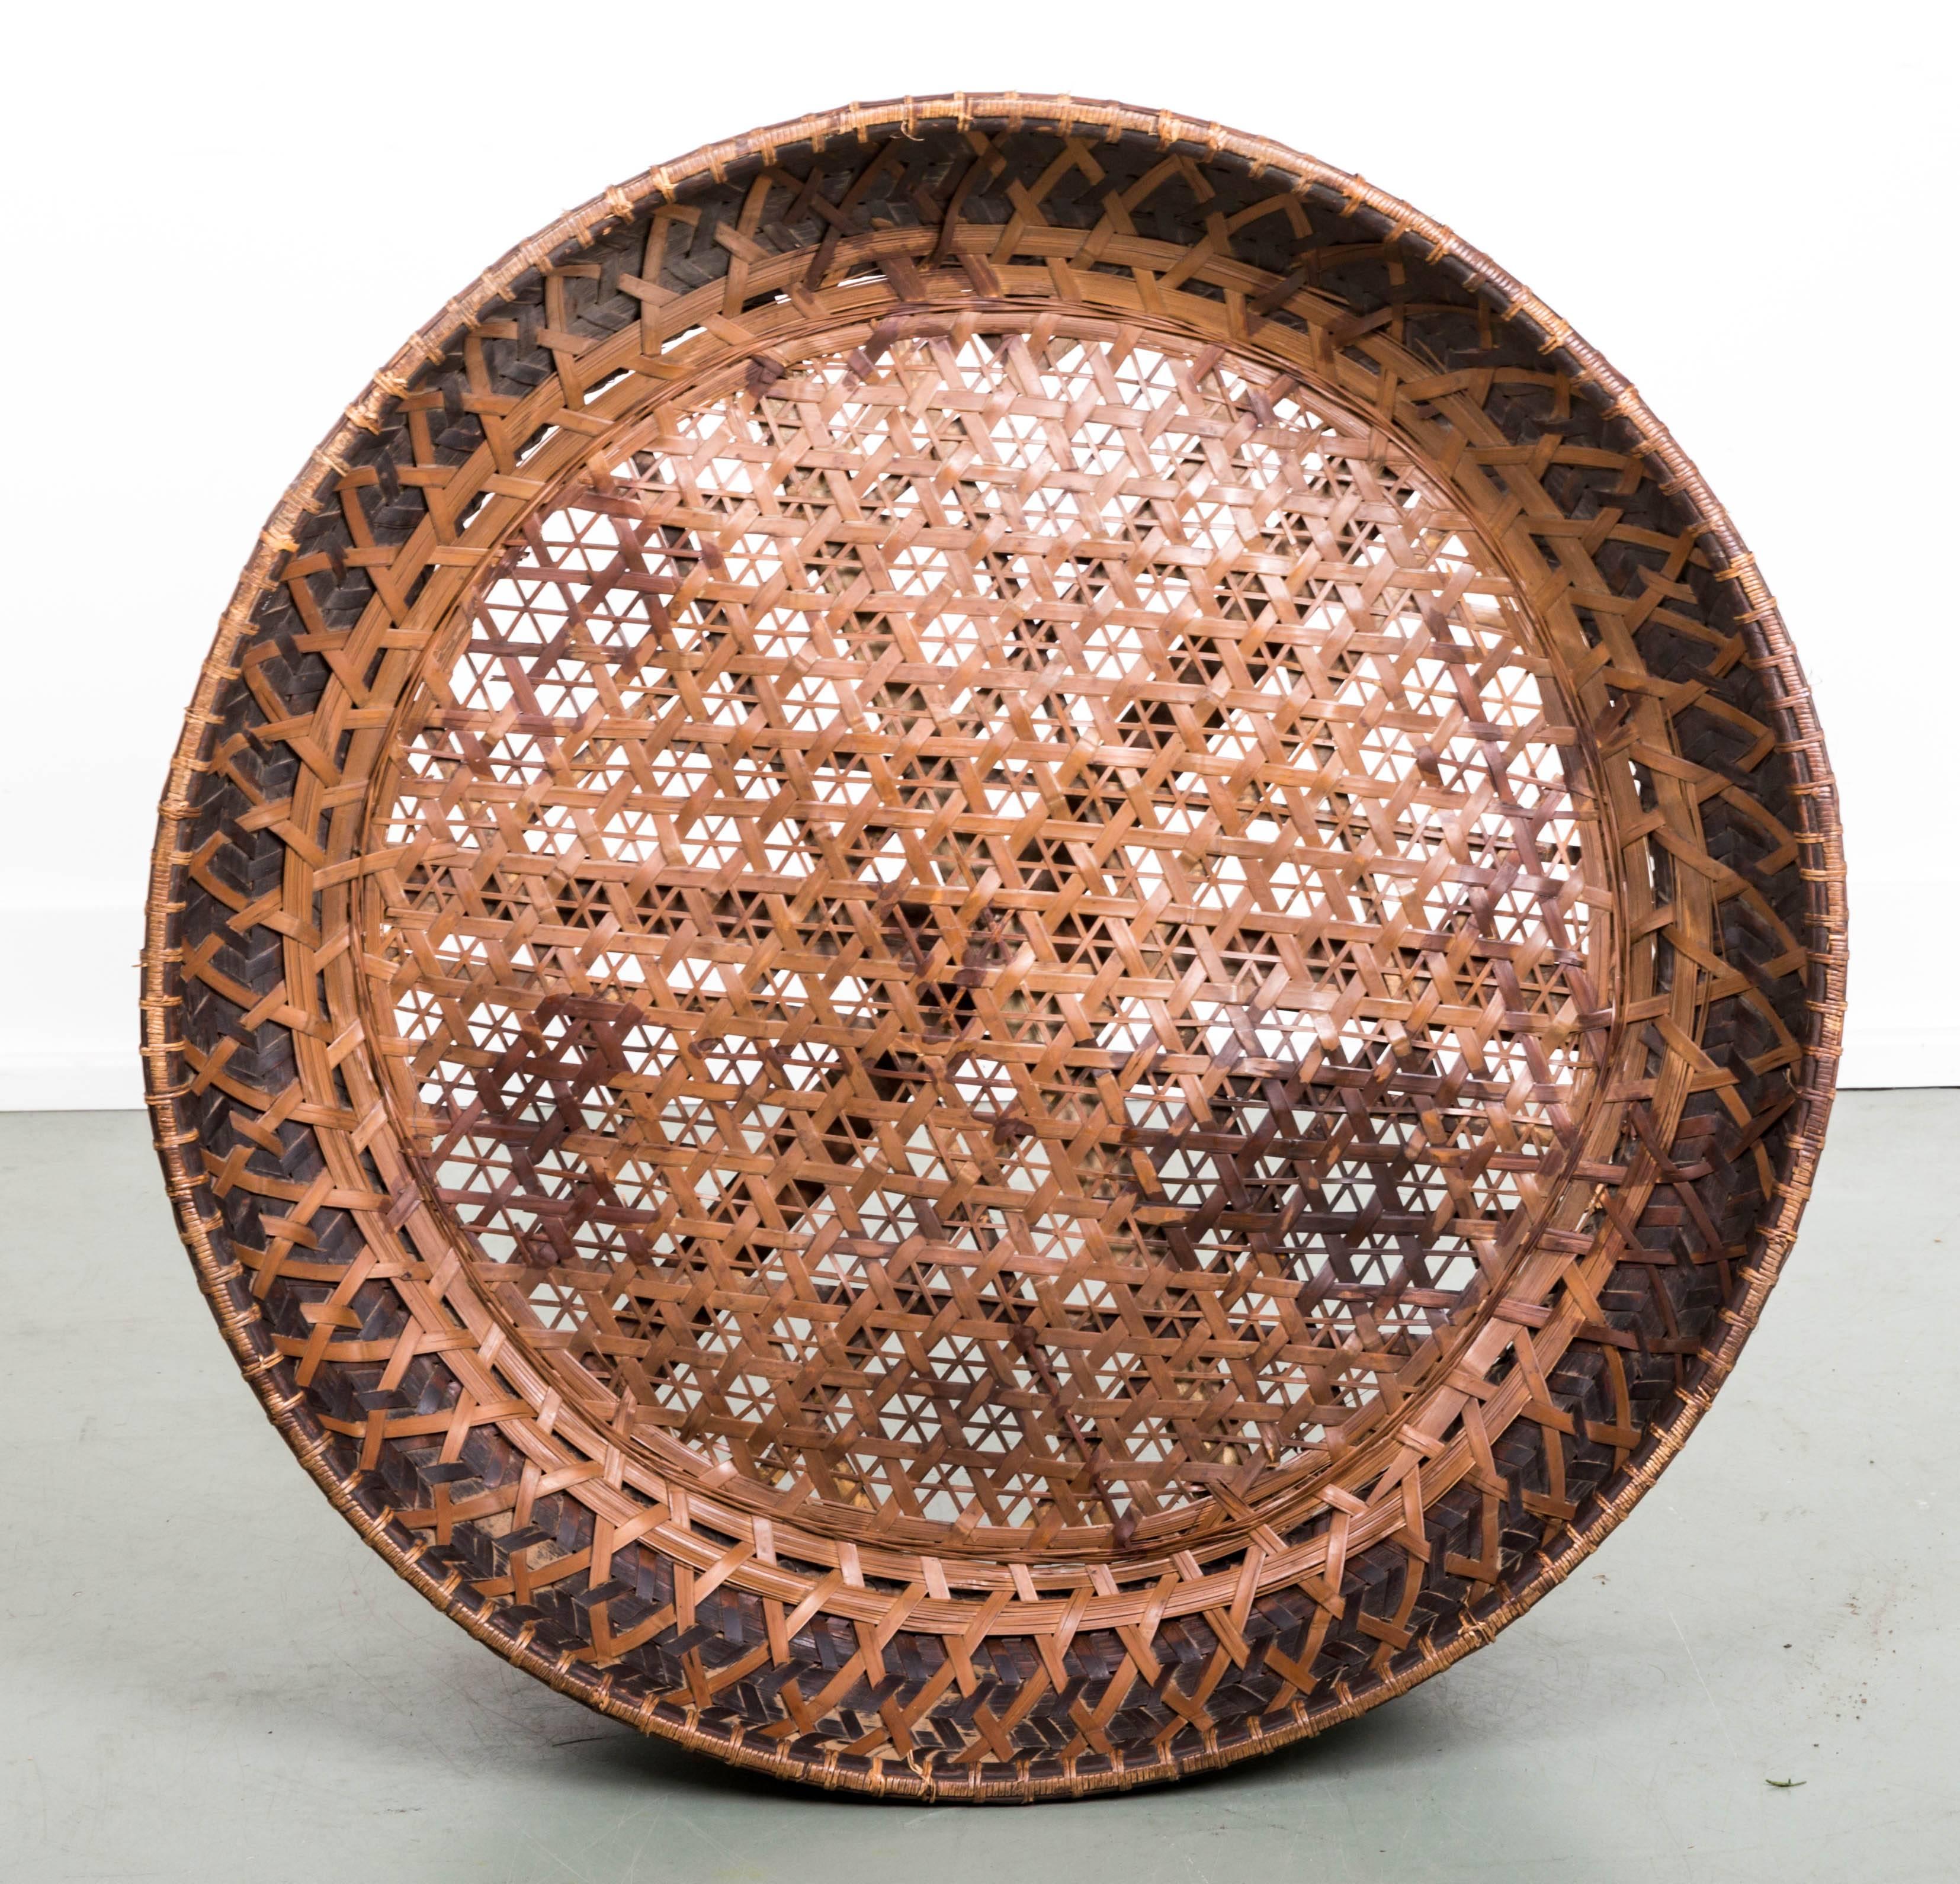 Late 19th century woven Asian tea basket. Intricate woven design, hourglass shape 31 inch;wide; 11 1/2 inch; high, old repair that has been rewoven. Wonderful patina decorative rivets holding woven rattan to bamboo frame.